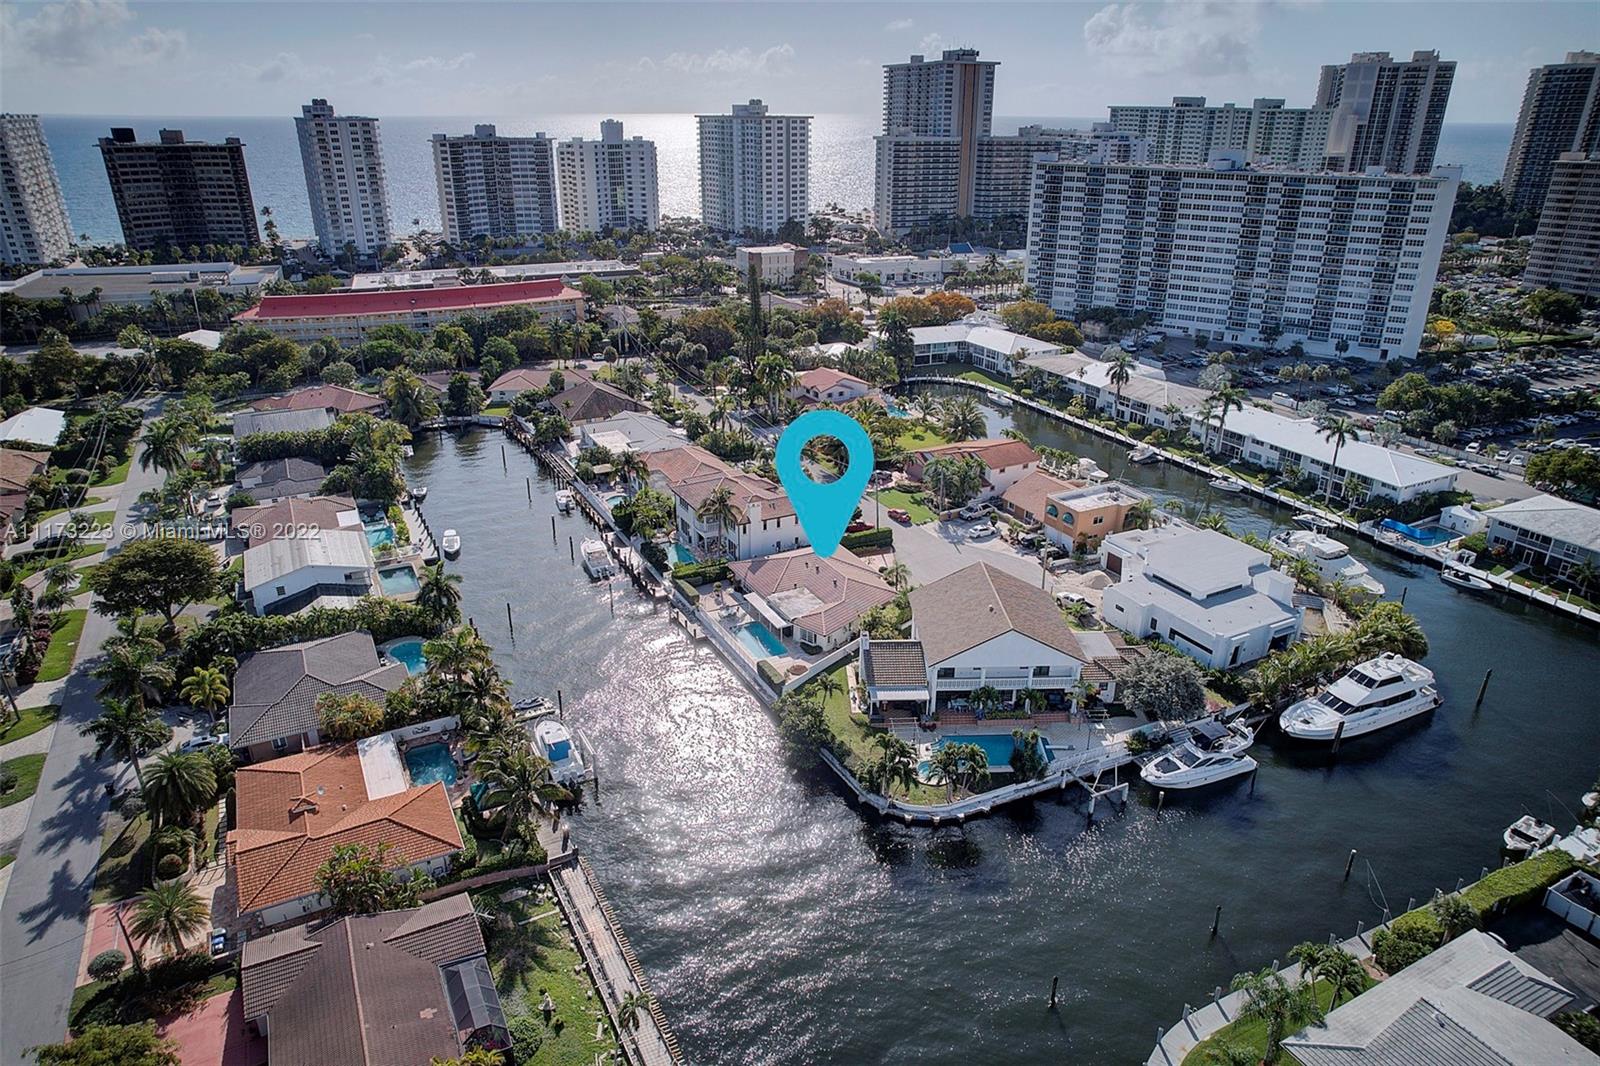 LOCATION!! LOCATION!! LOCATION!! Rare chance to be on the Ft. Lauderdale intercostal with a pool and no fixed bridges!! Spacious backyard with a dock and pool!! Plenty of room to build a much larger dock if needed. Live on the Galt ocean mile and walk to the beach!! Must see, will go quick!!